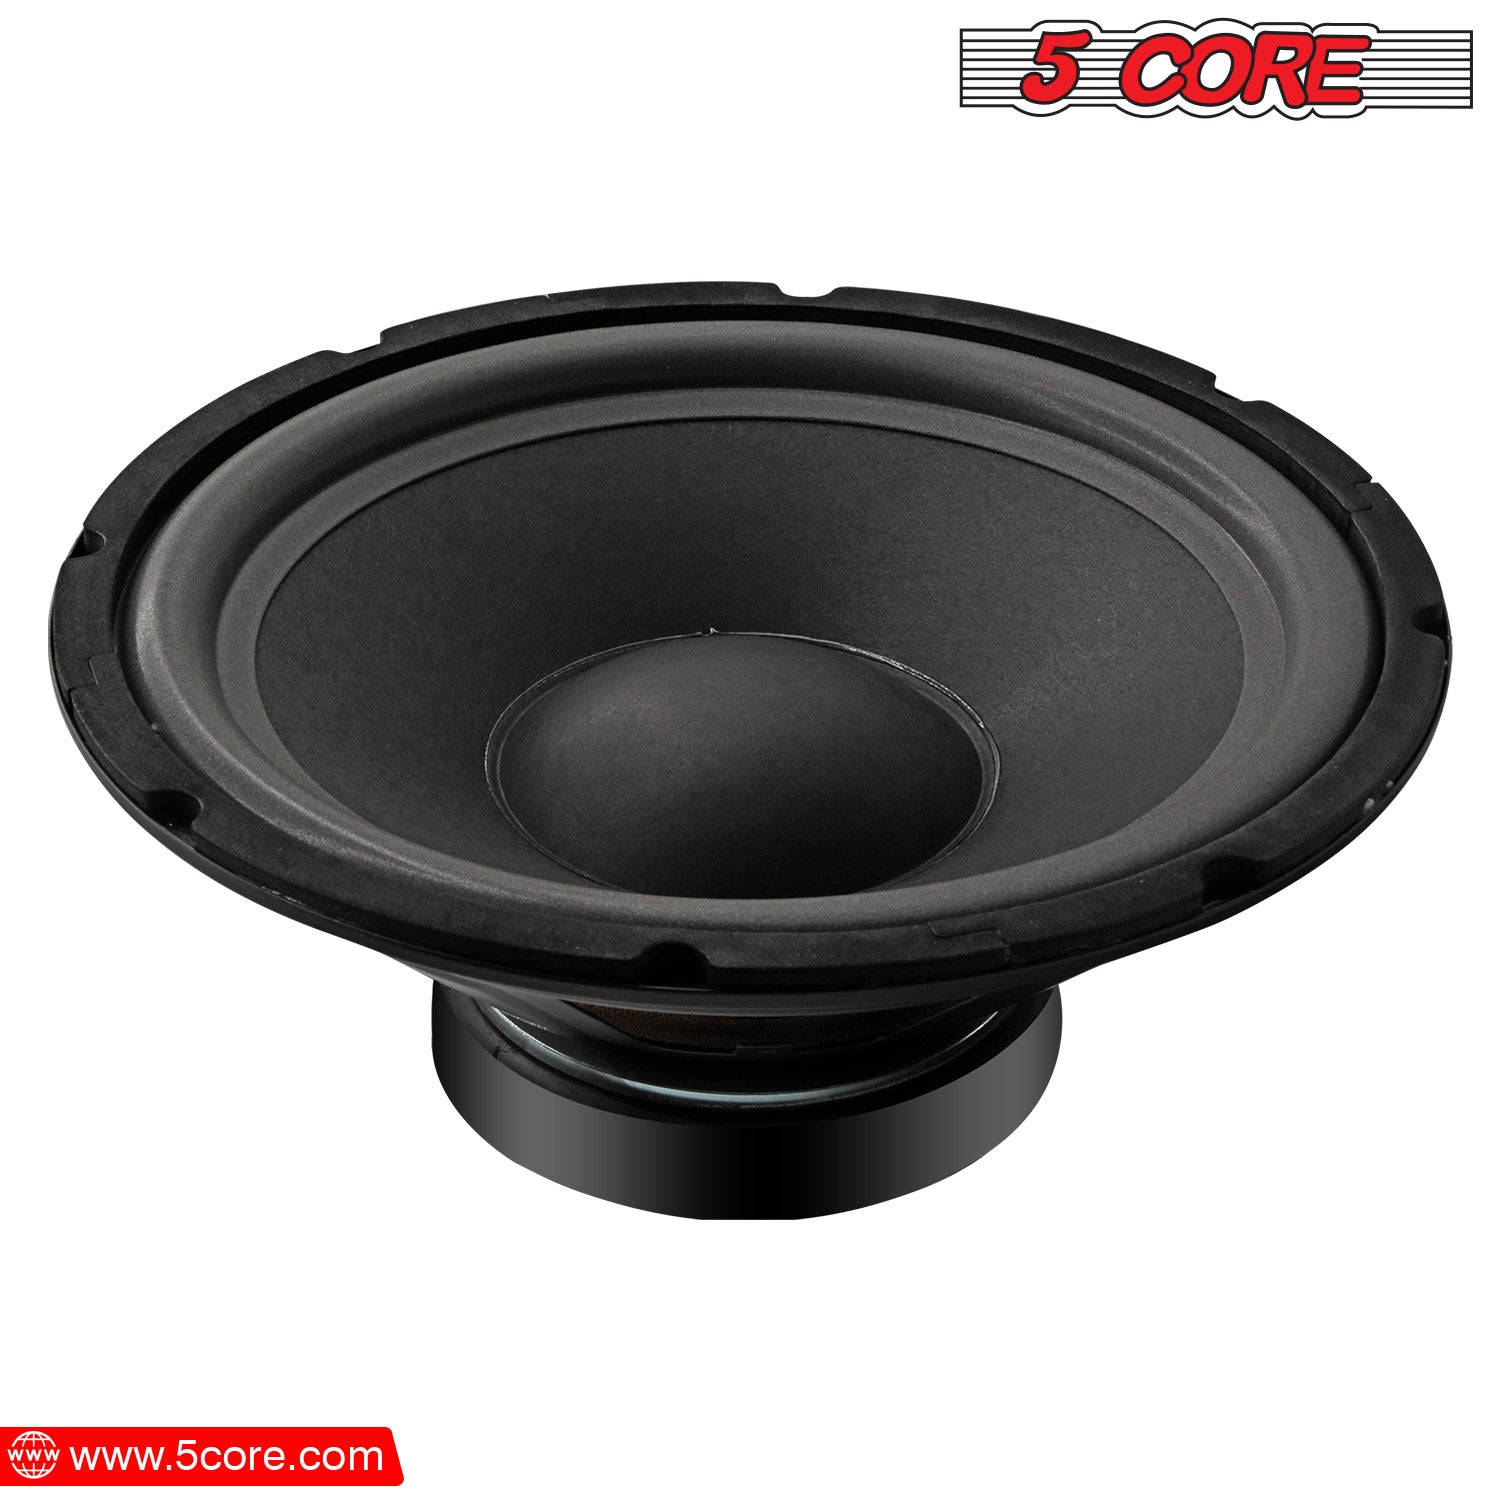 DJ Audio Replacement Sub Woofer